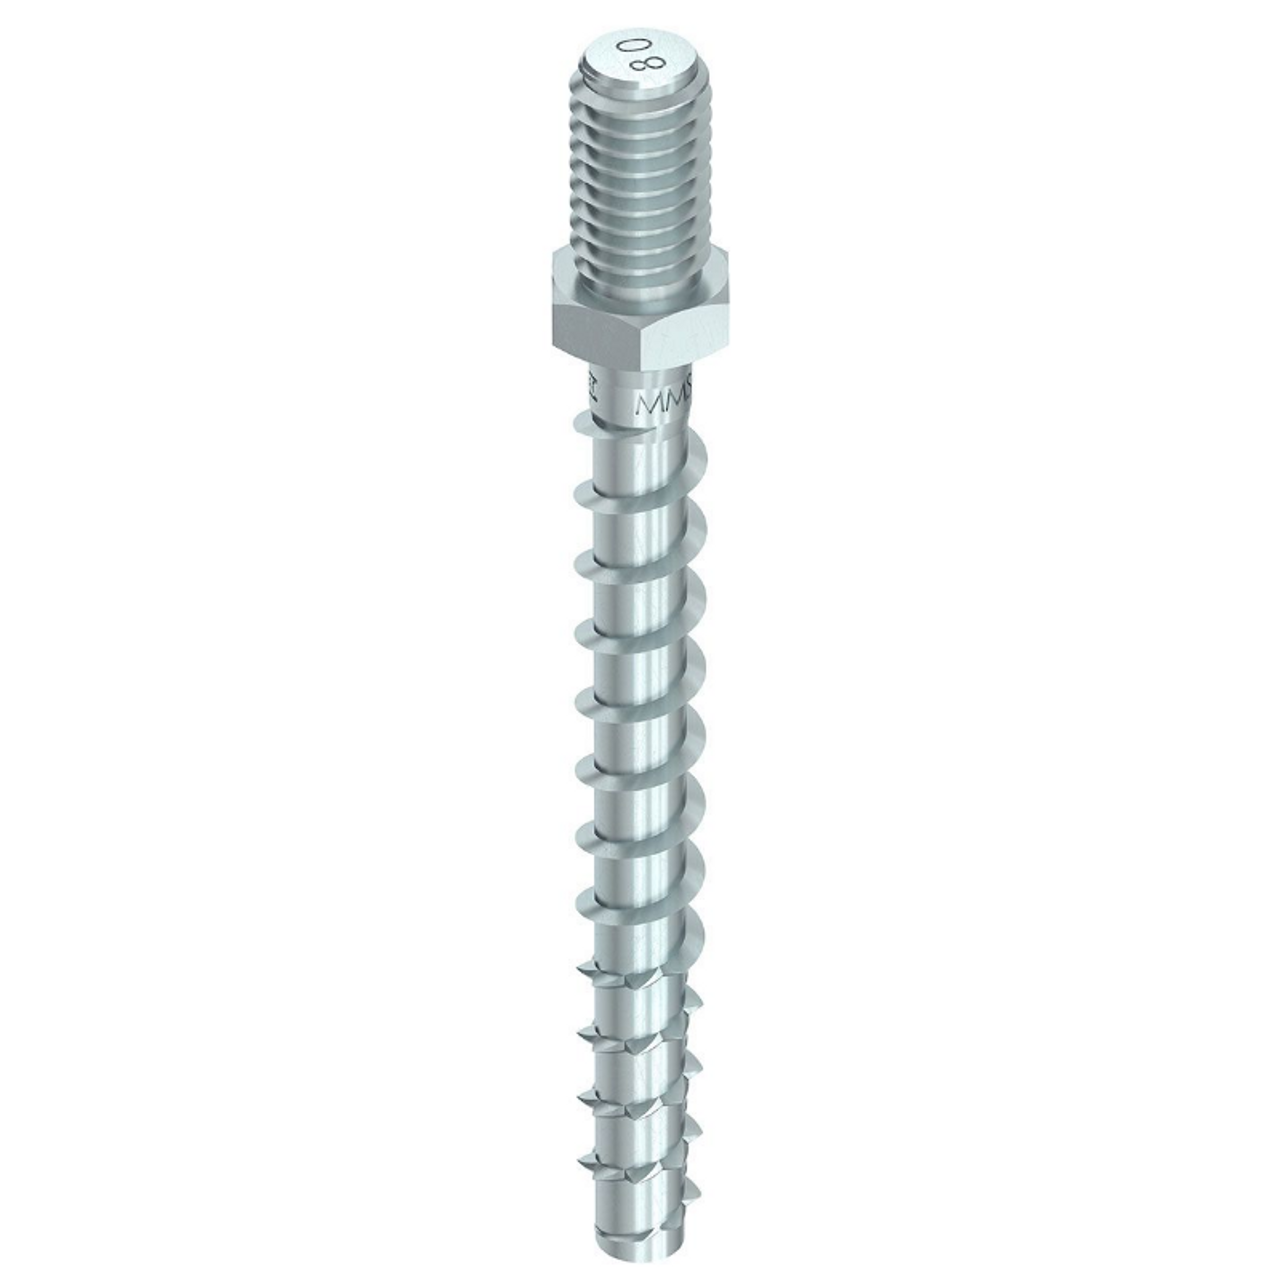 HECO 6mm Silver Zinc Pre-Set Threaded Screw Anchor with SW-10 for the Construction Industry and Installers in Western Australia and South Australia.